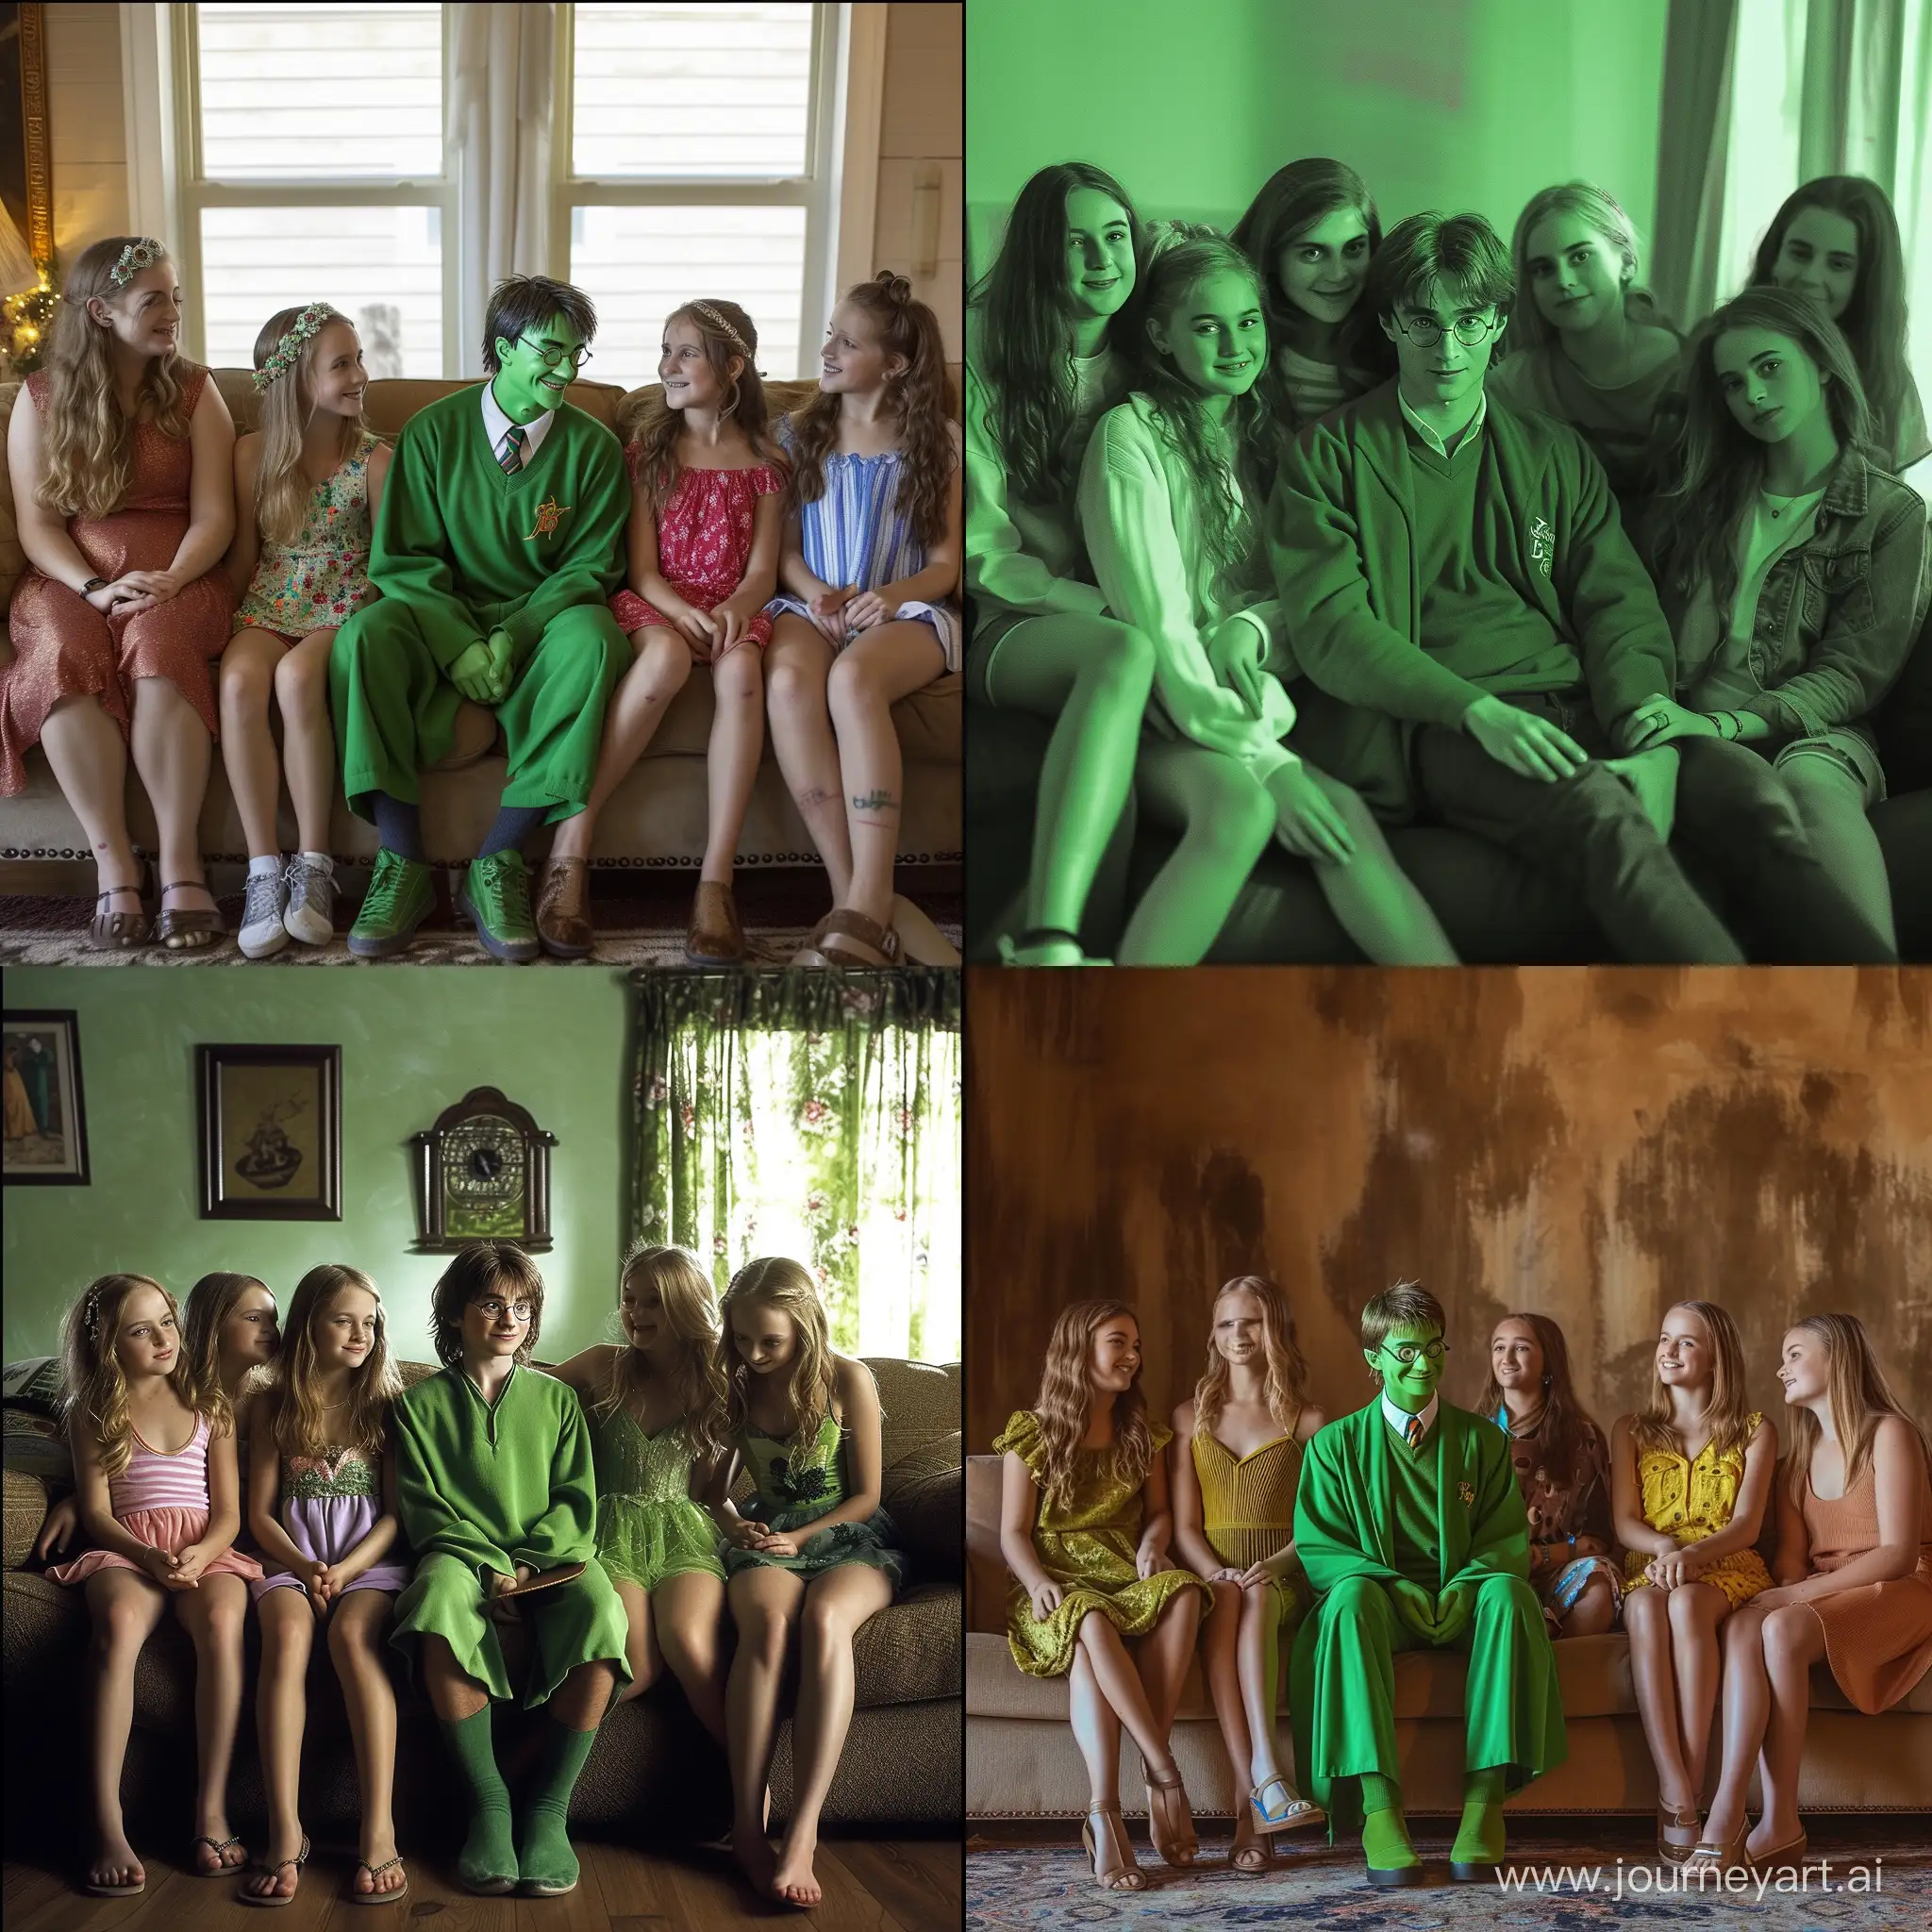 Enchanting-Gathering-Green-Harry-Potter-Surrounded-by-Five-Girls-on-the-Couch